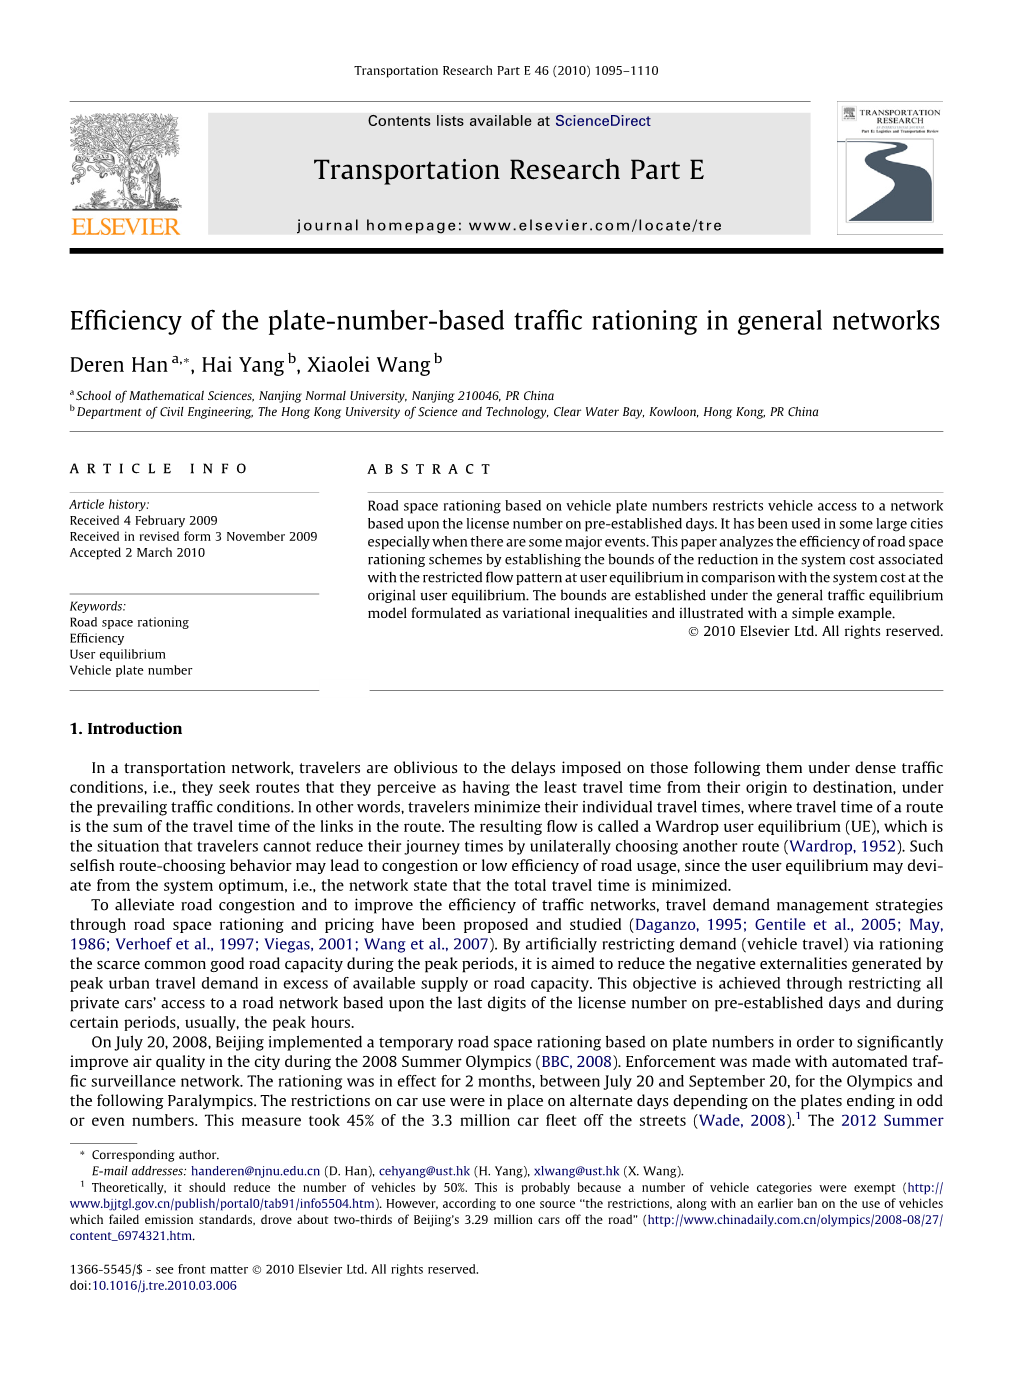 Efficiency of the Plate-Number-Based Traffic Rationing in General Networks